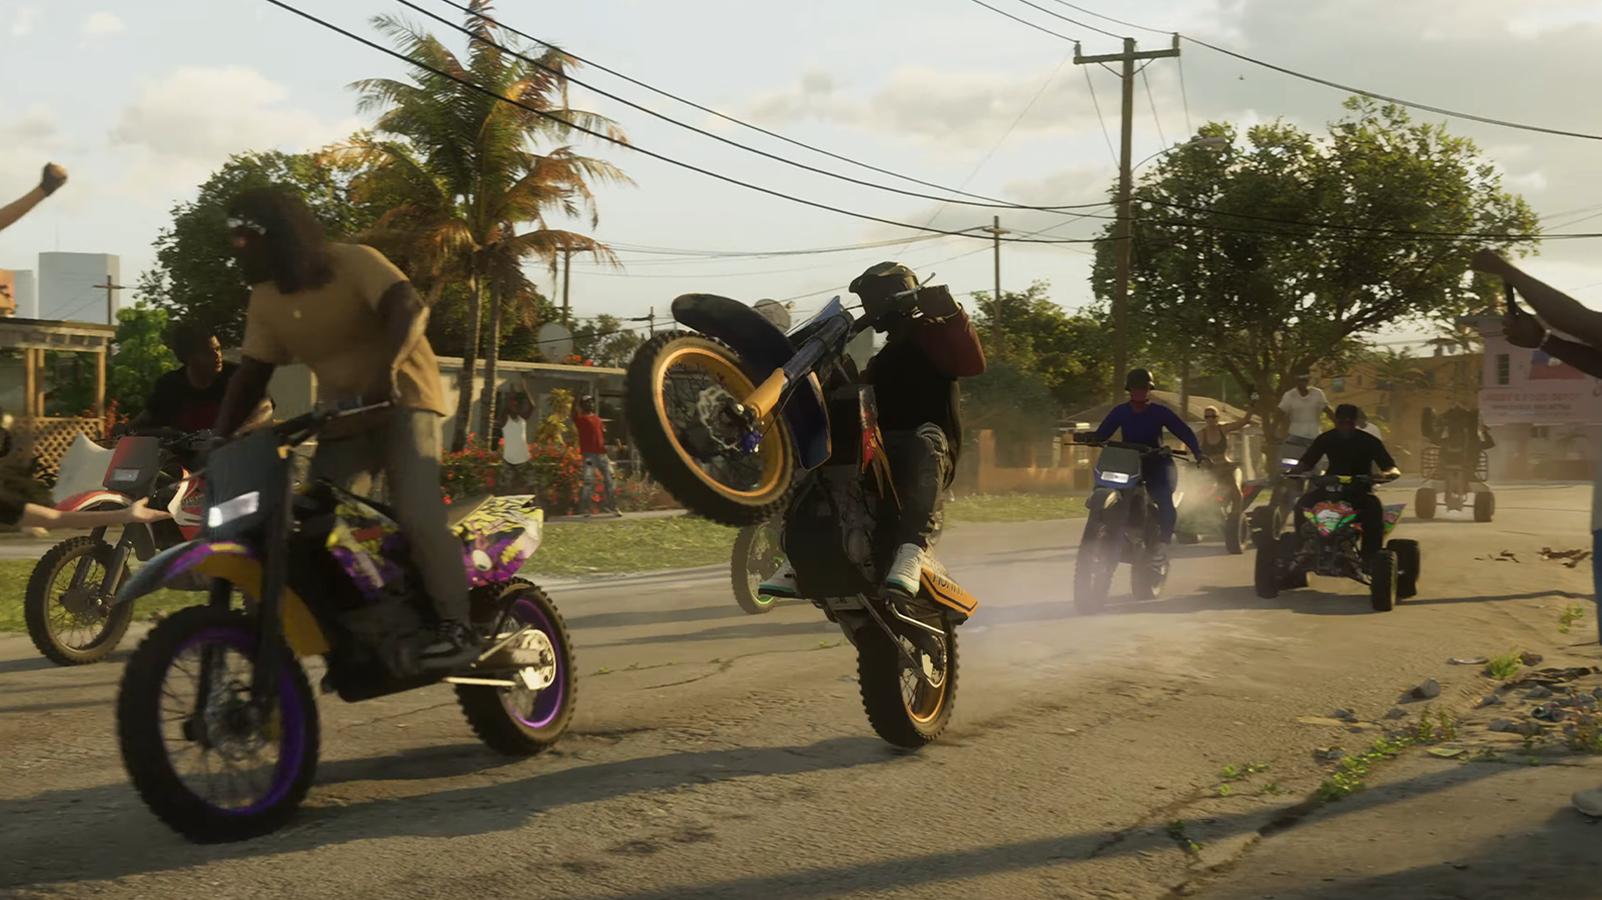 GTA 6 first official look confirms what we've known all along